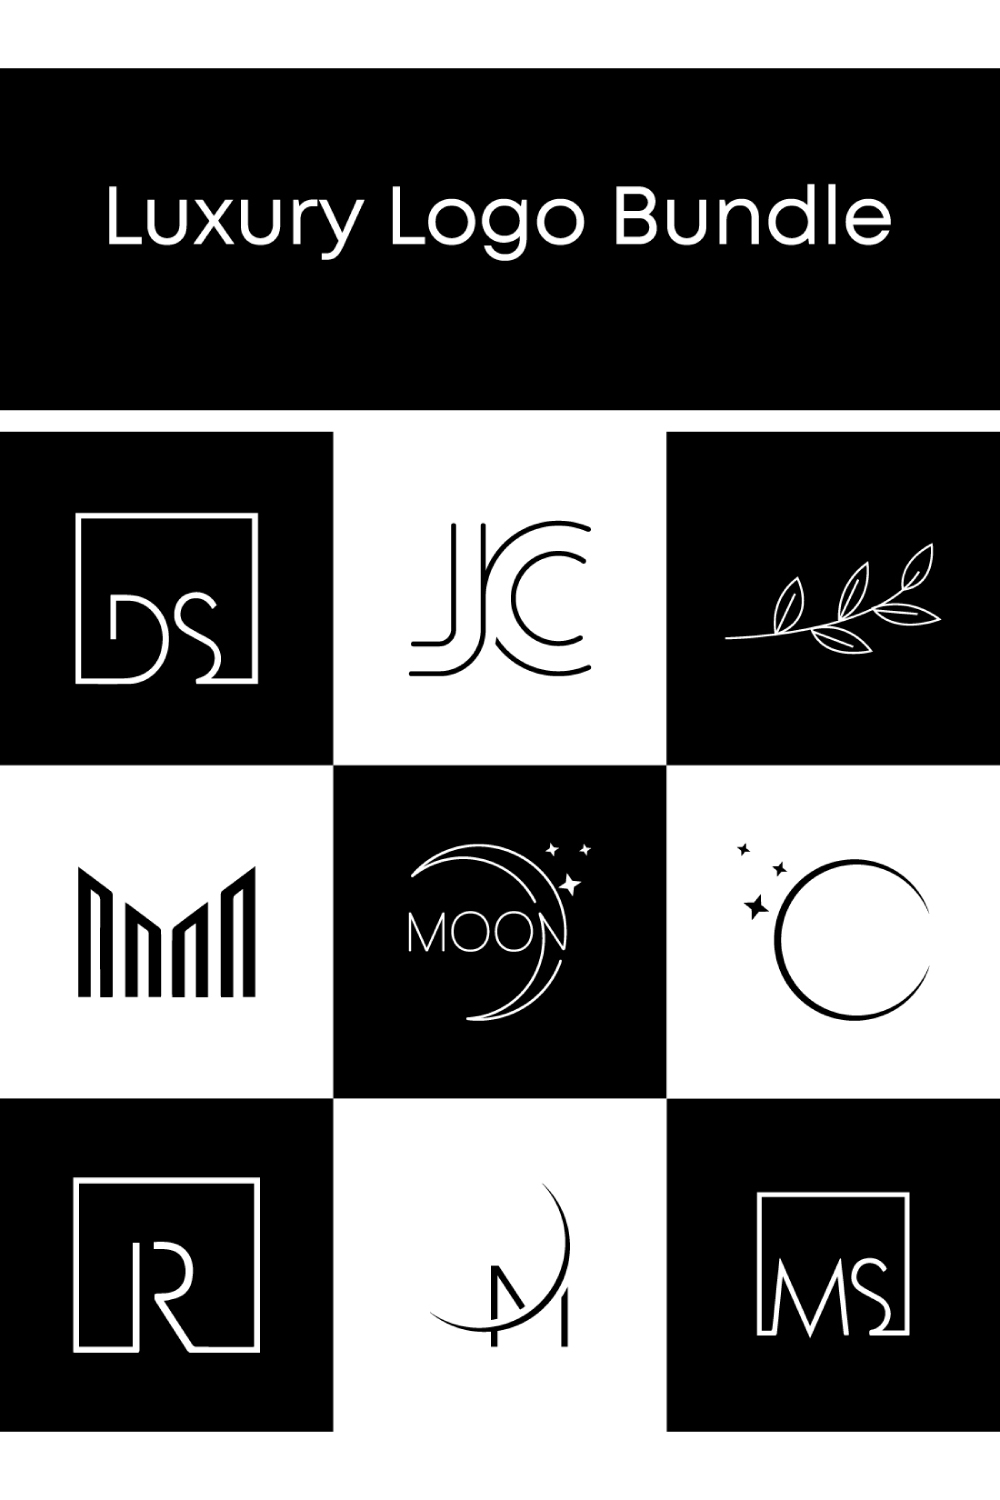 Collection of images with exquisite luxury logos in white.